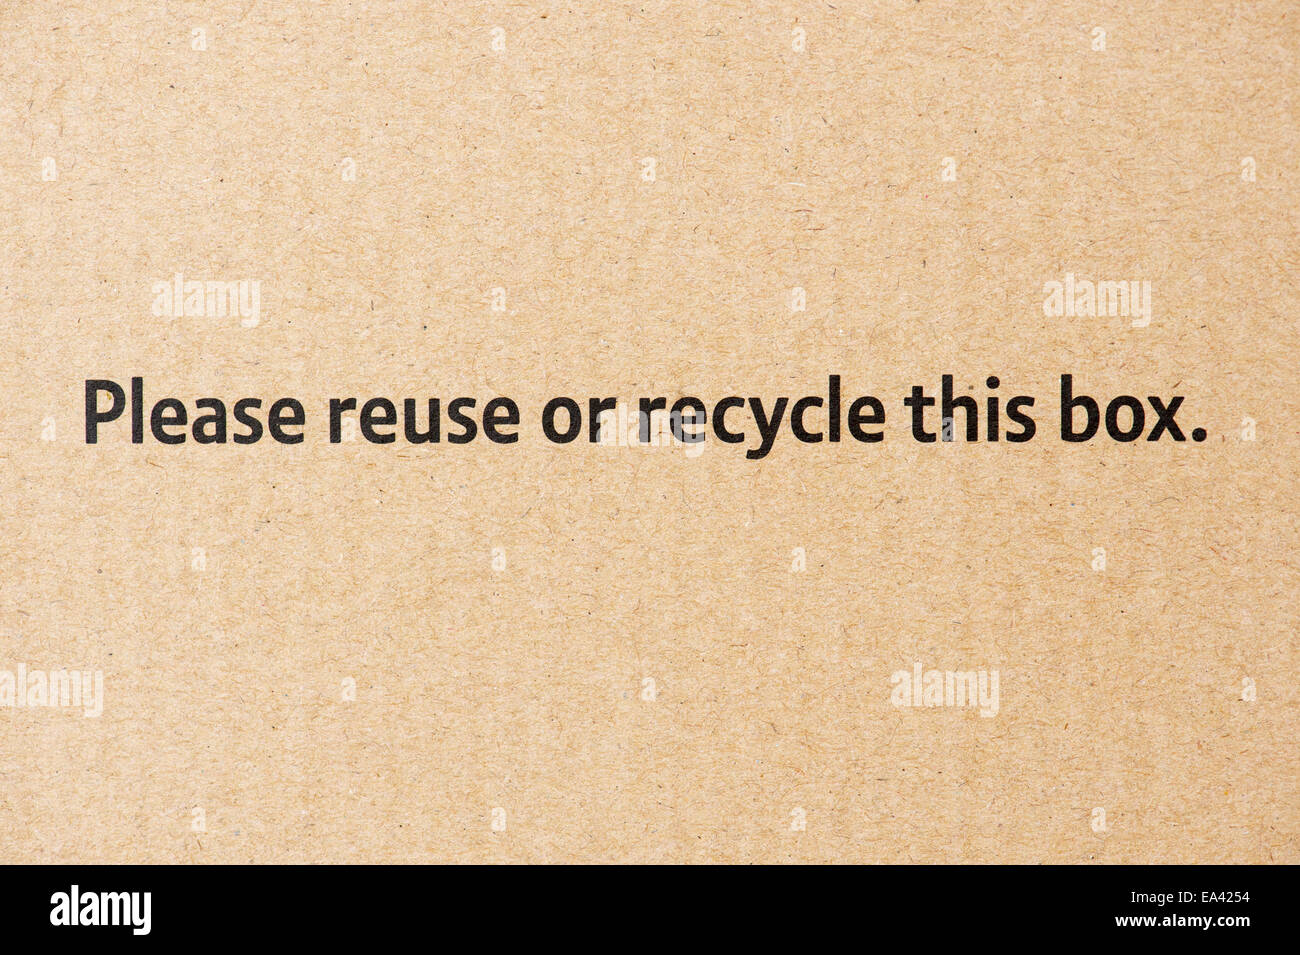 Please reuse or recycle this box on a cardboard box Stock Photo